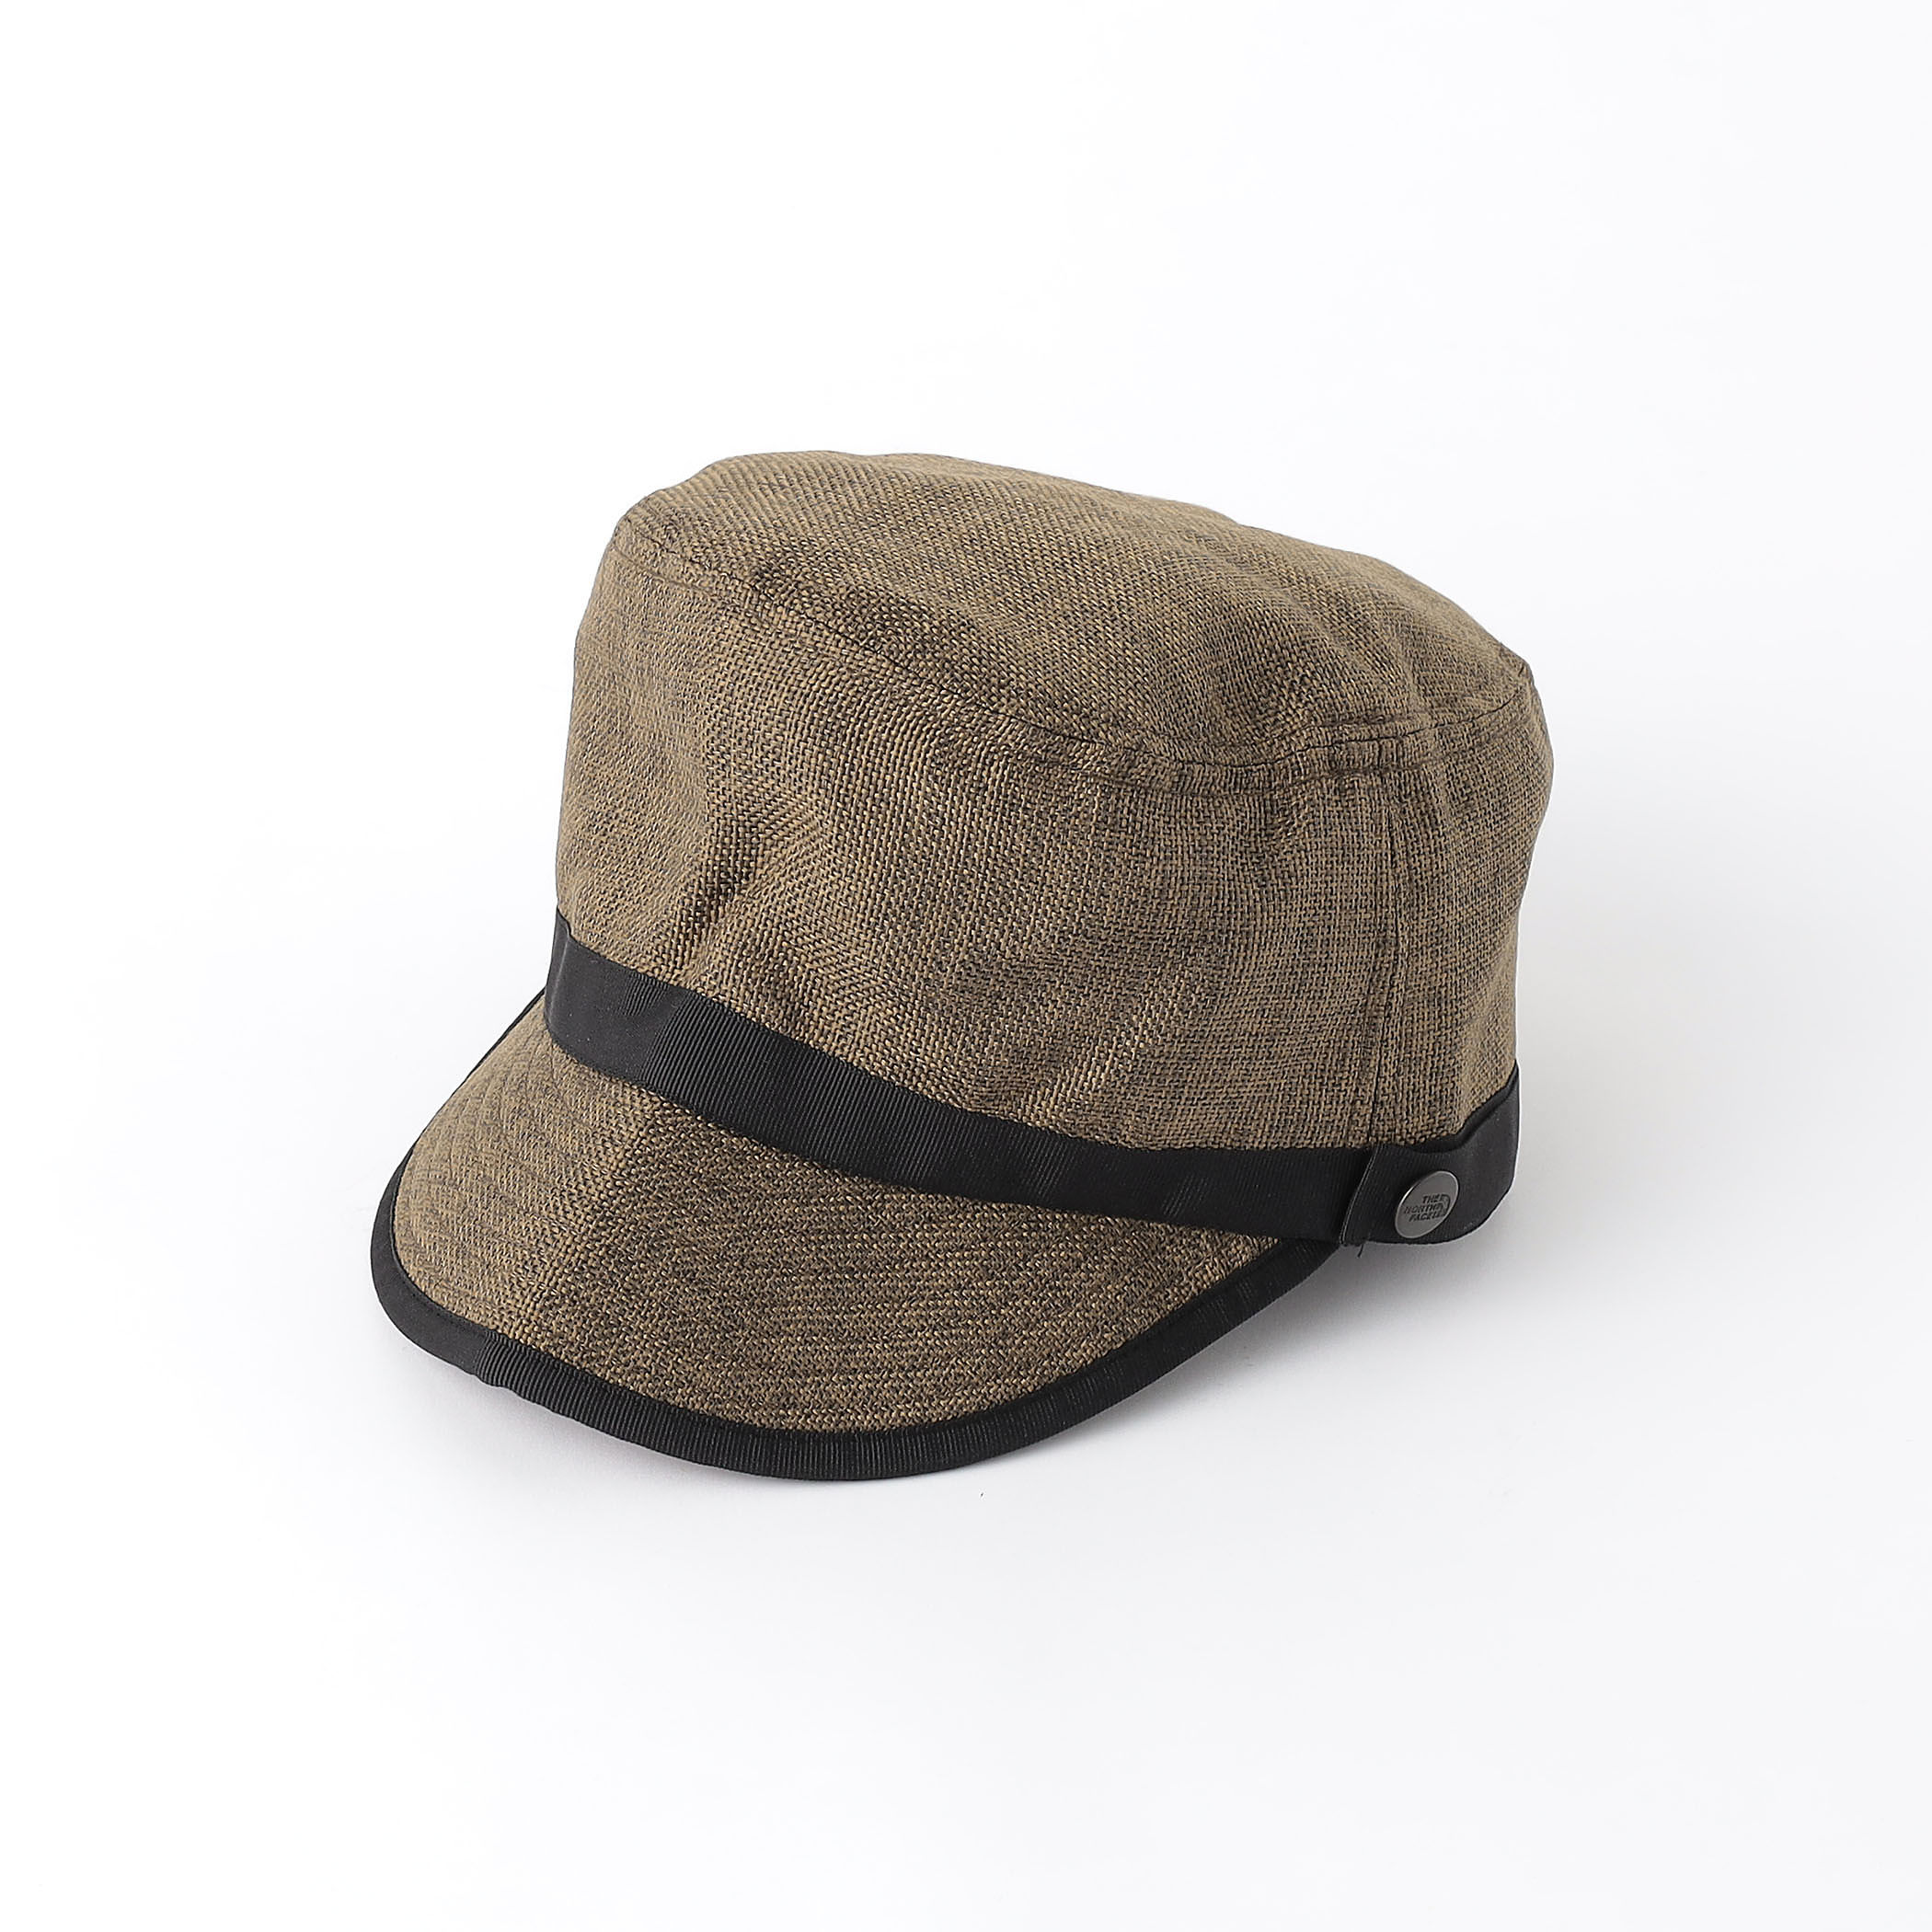 UNITED ARROWS green label relaxing
【WEB限定】＜THE NORTH FACE(ザ ノースフェイス)＞ ハイク キャップ HIKE CAP
￥6,490